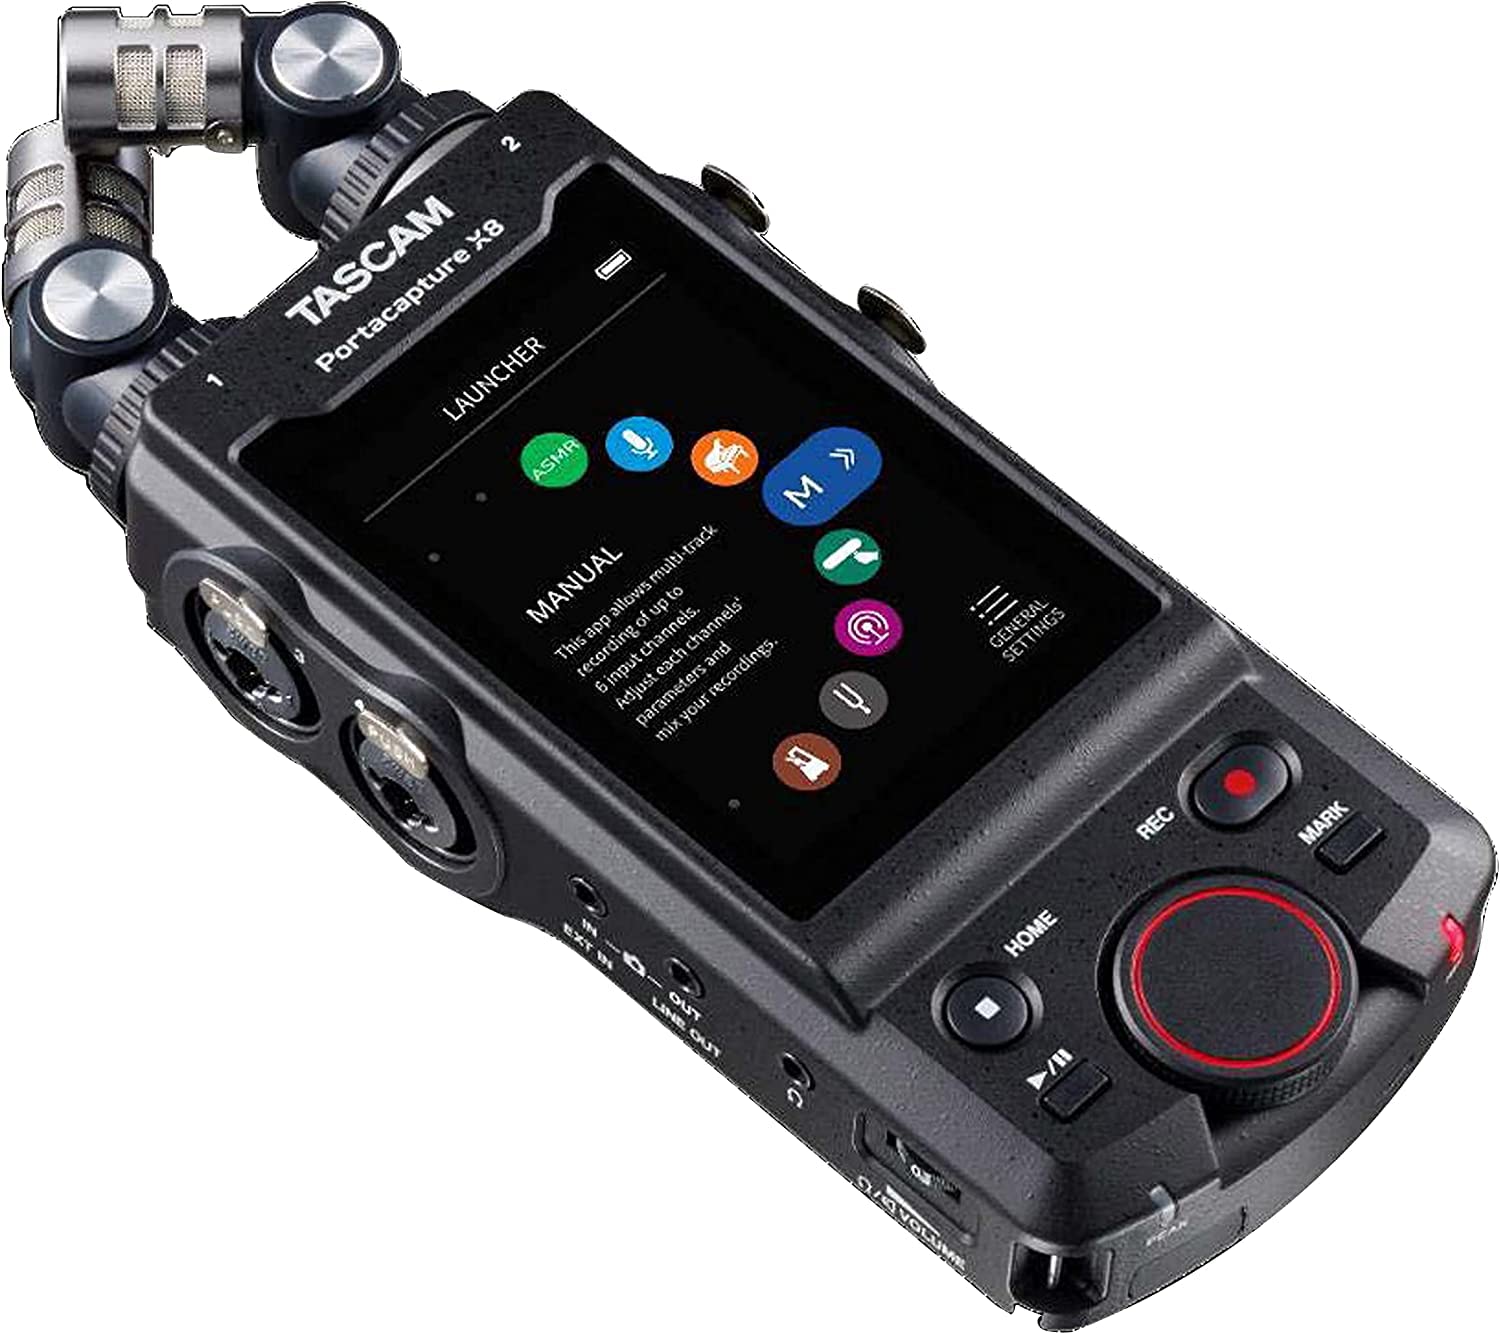 Tascam - Portacapture X8 High Resolution Multi-Track Recorder, Portable Recorder, Field, Music, Podcast, Voice, ASMR, Podcasting